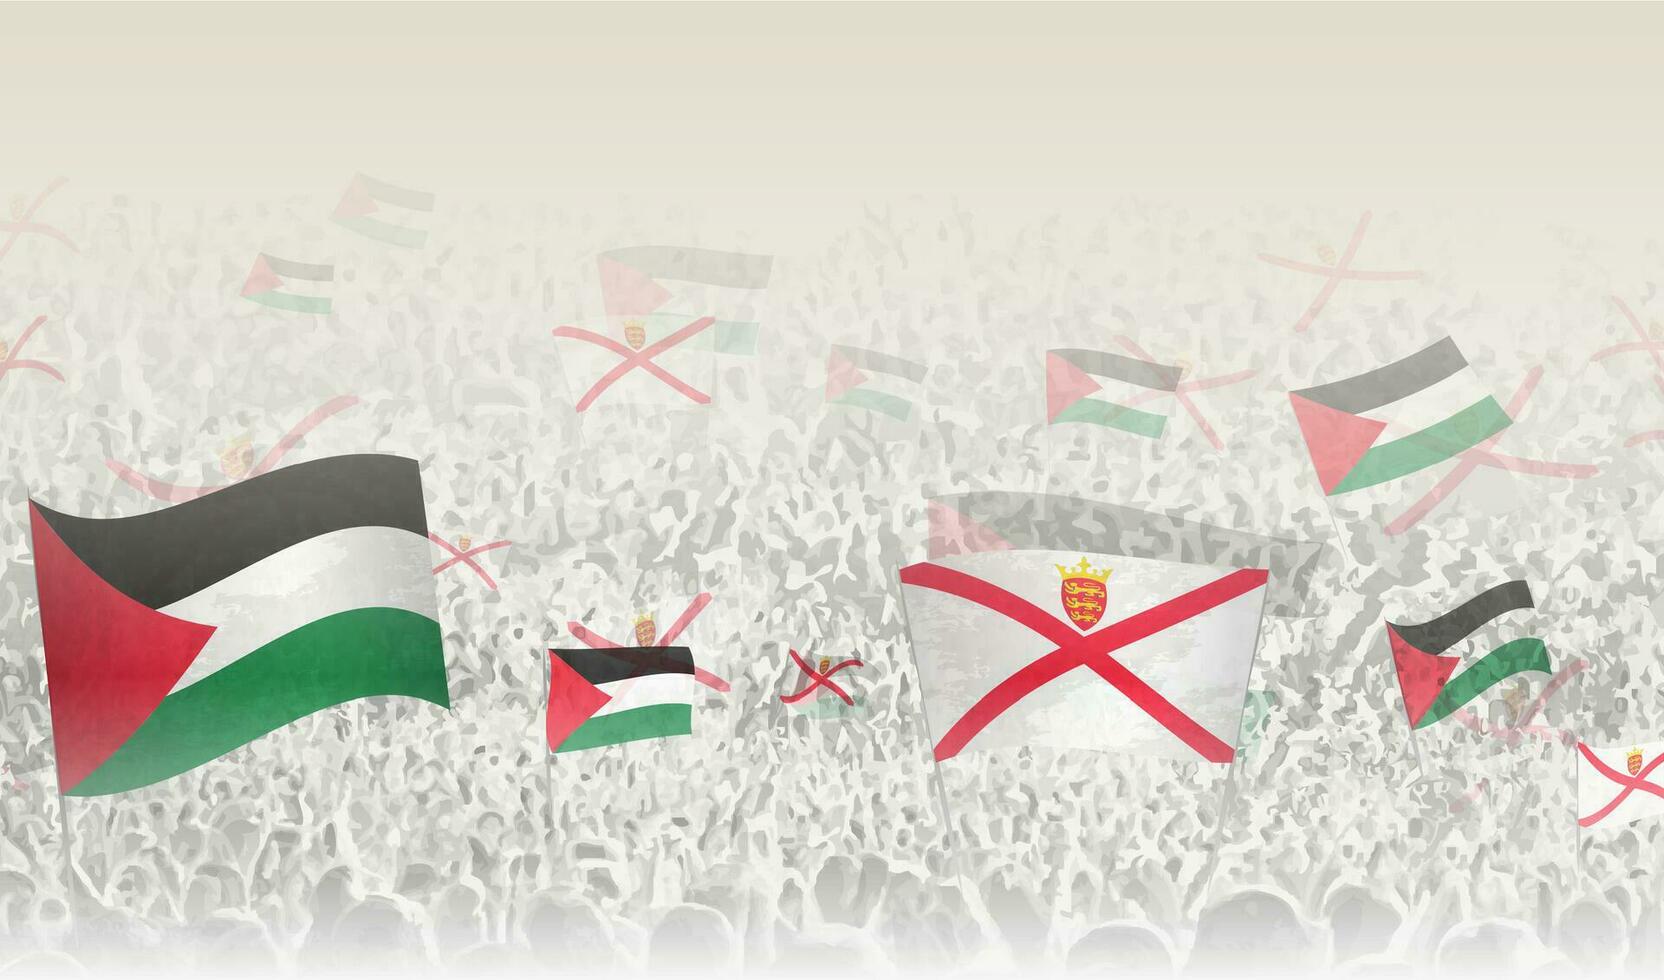 Palestine and Jersey flags in a crowd of cheering people. vector